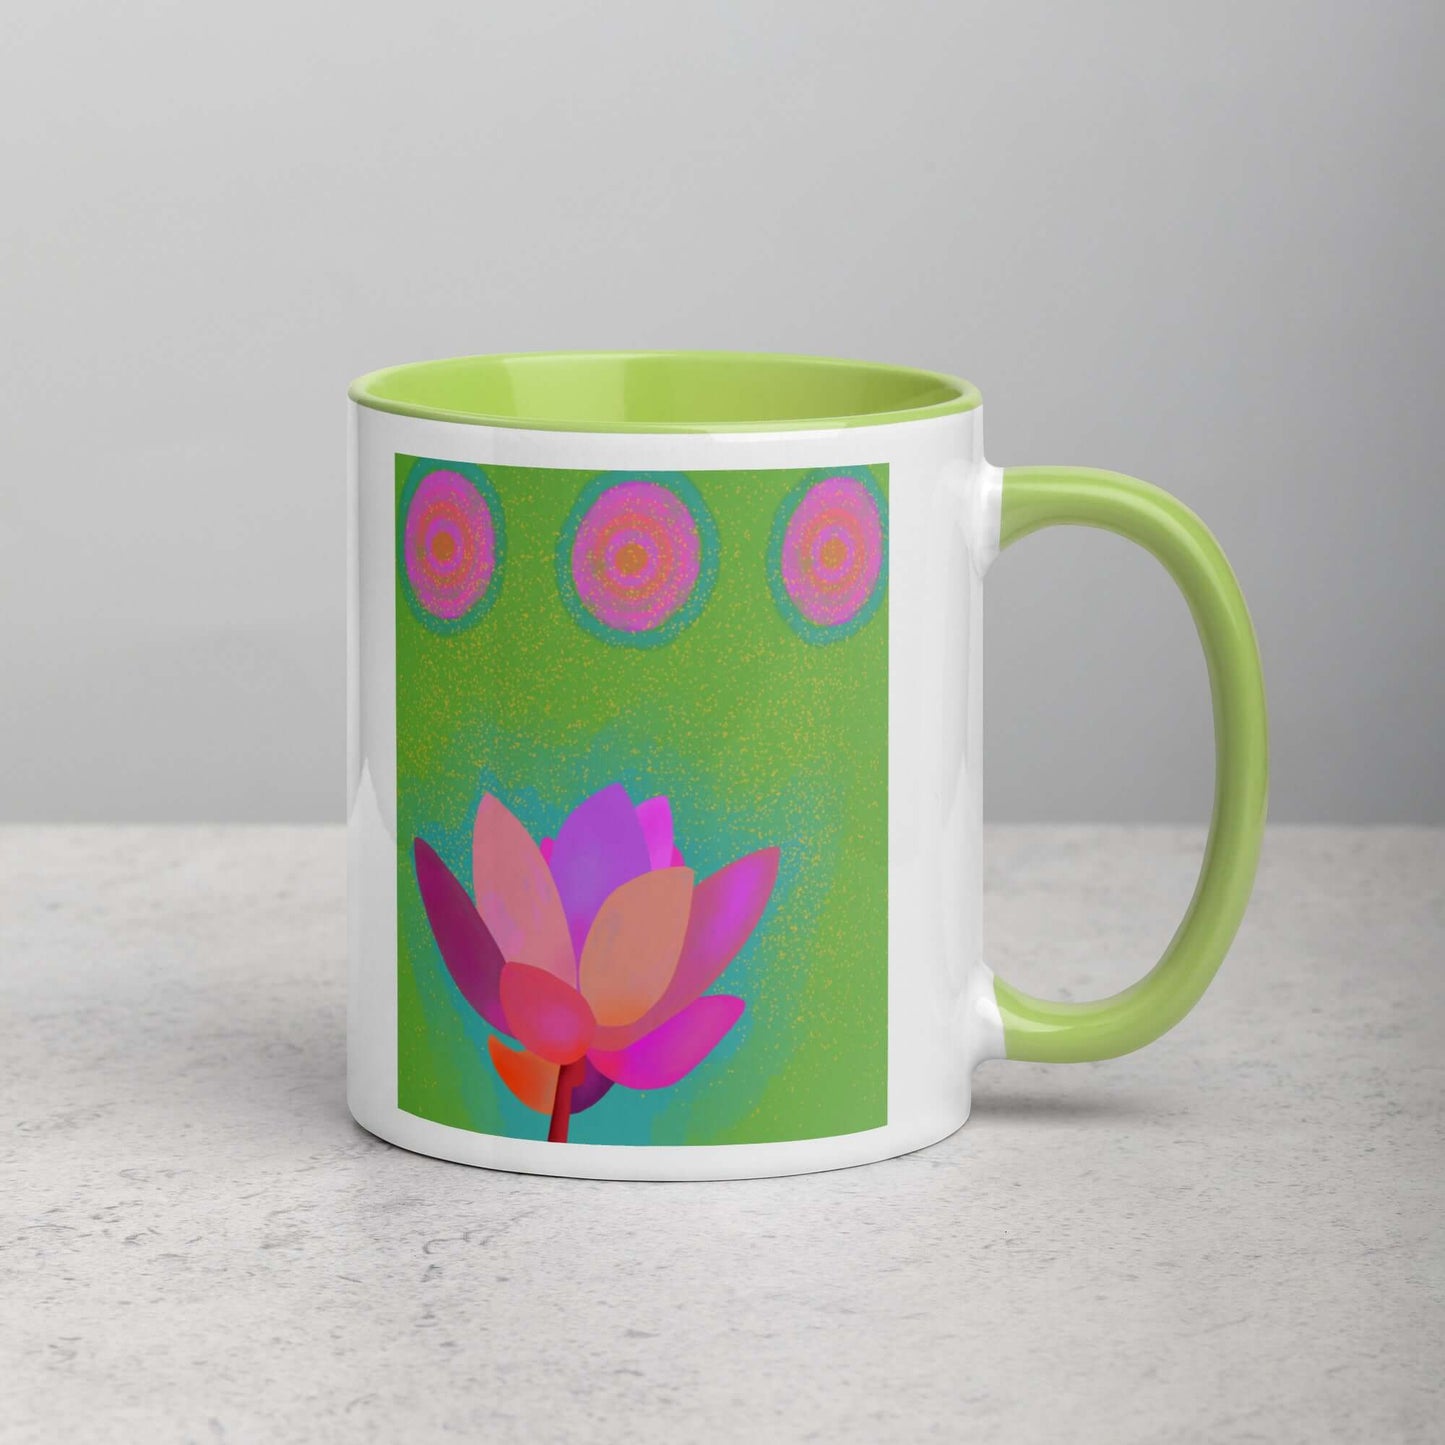 Pink Lotus Flower on Green Background “Lotus Dots” Mug with Lime Green Color Inside Right Handed Front View